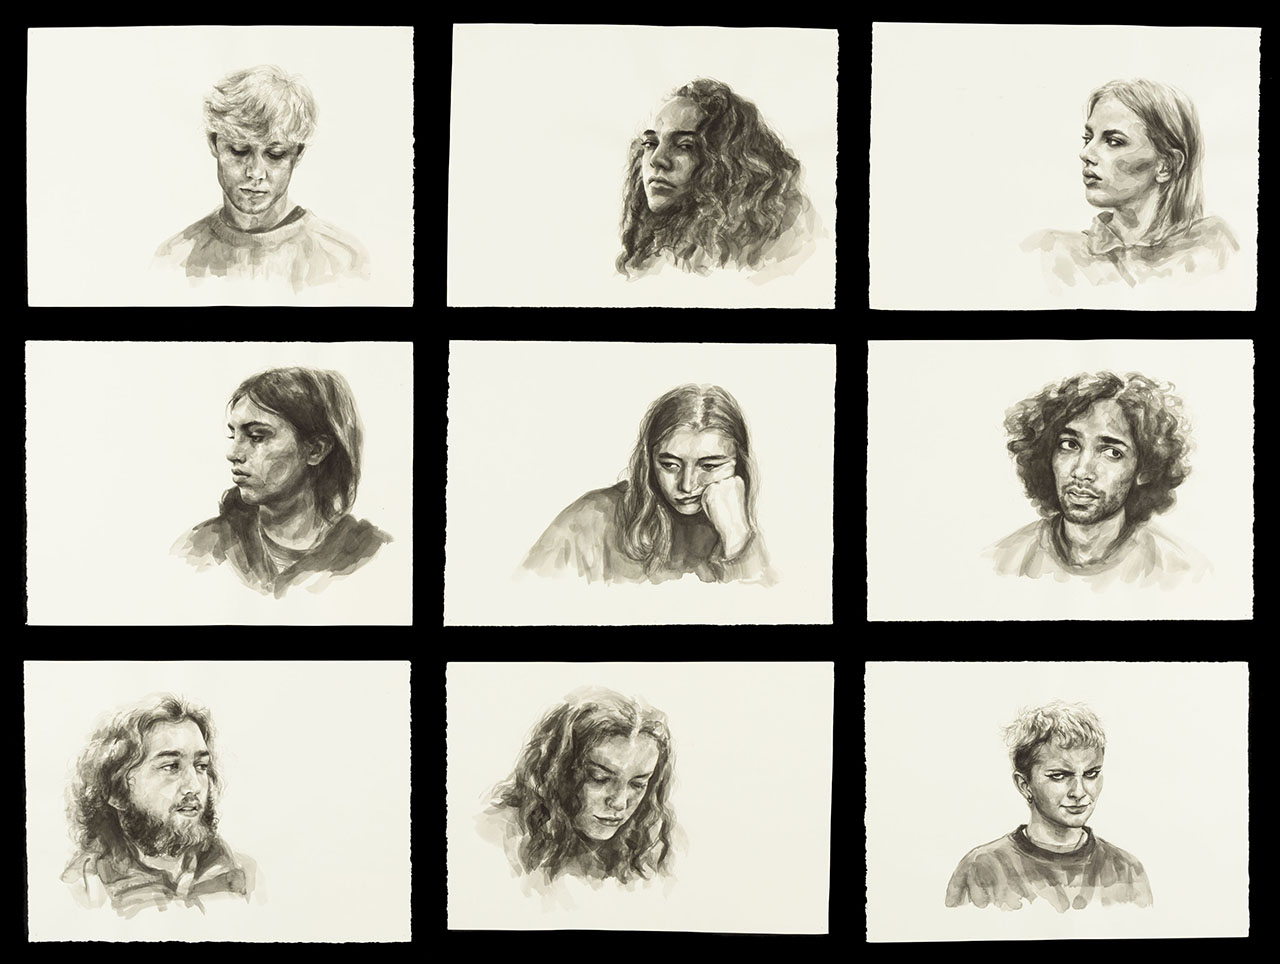 nine individual illustrated portraits in black and white arranged in three rows of three.